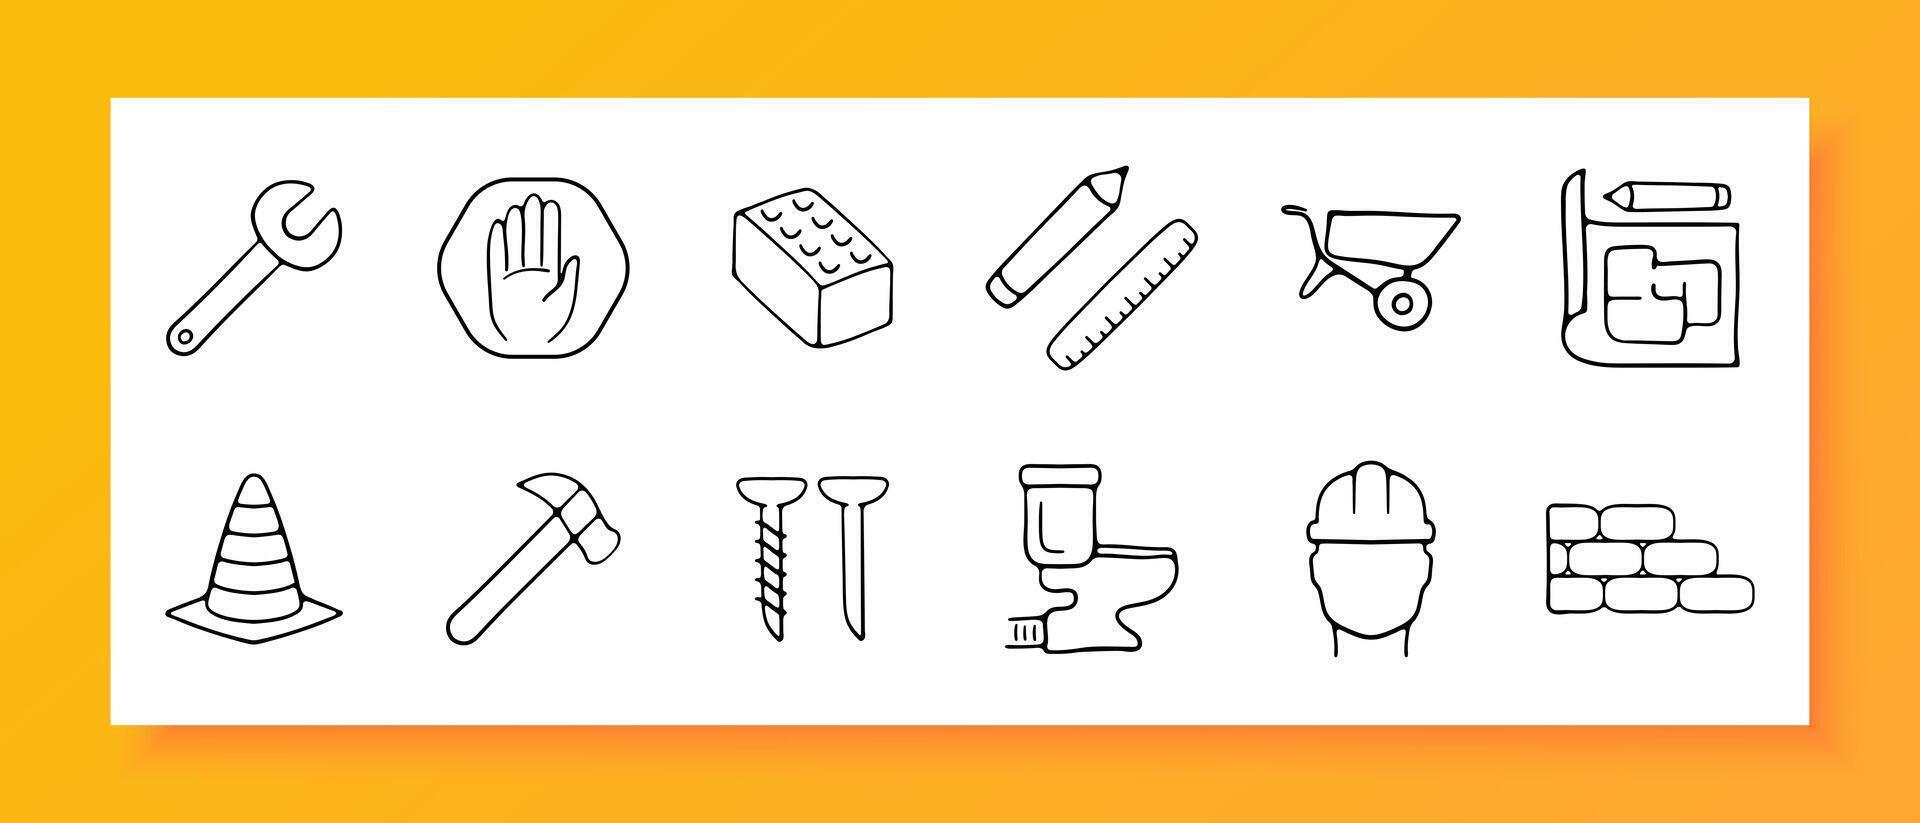 Construction icon set. Bricks, helmet, hammer, key, drawing, cart, ruler, pencil. Black icon on a white background. Vector line icon for business and advertising